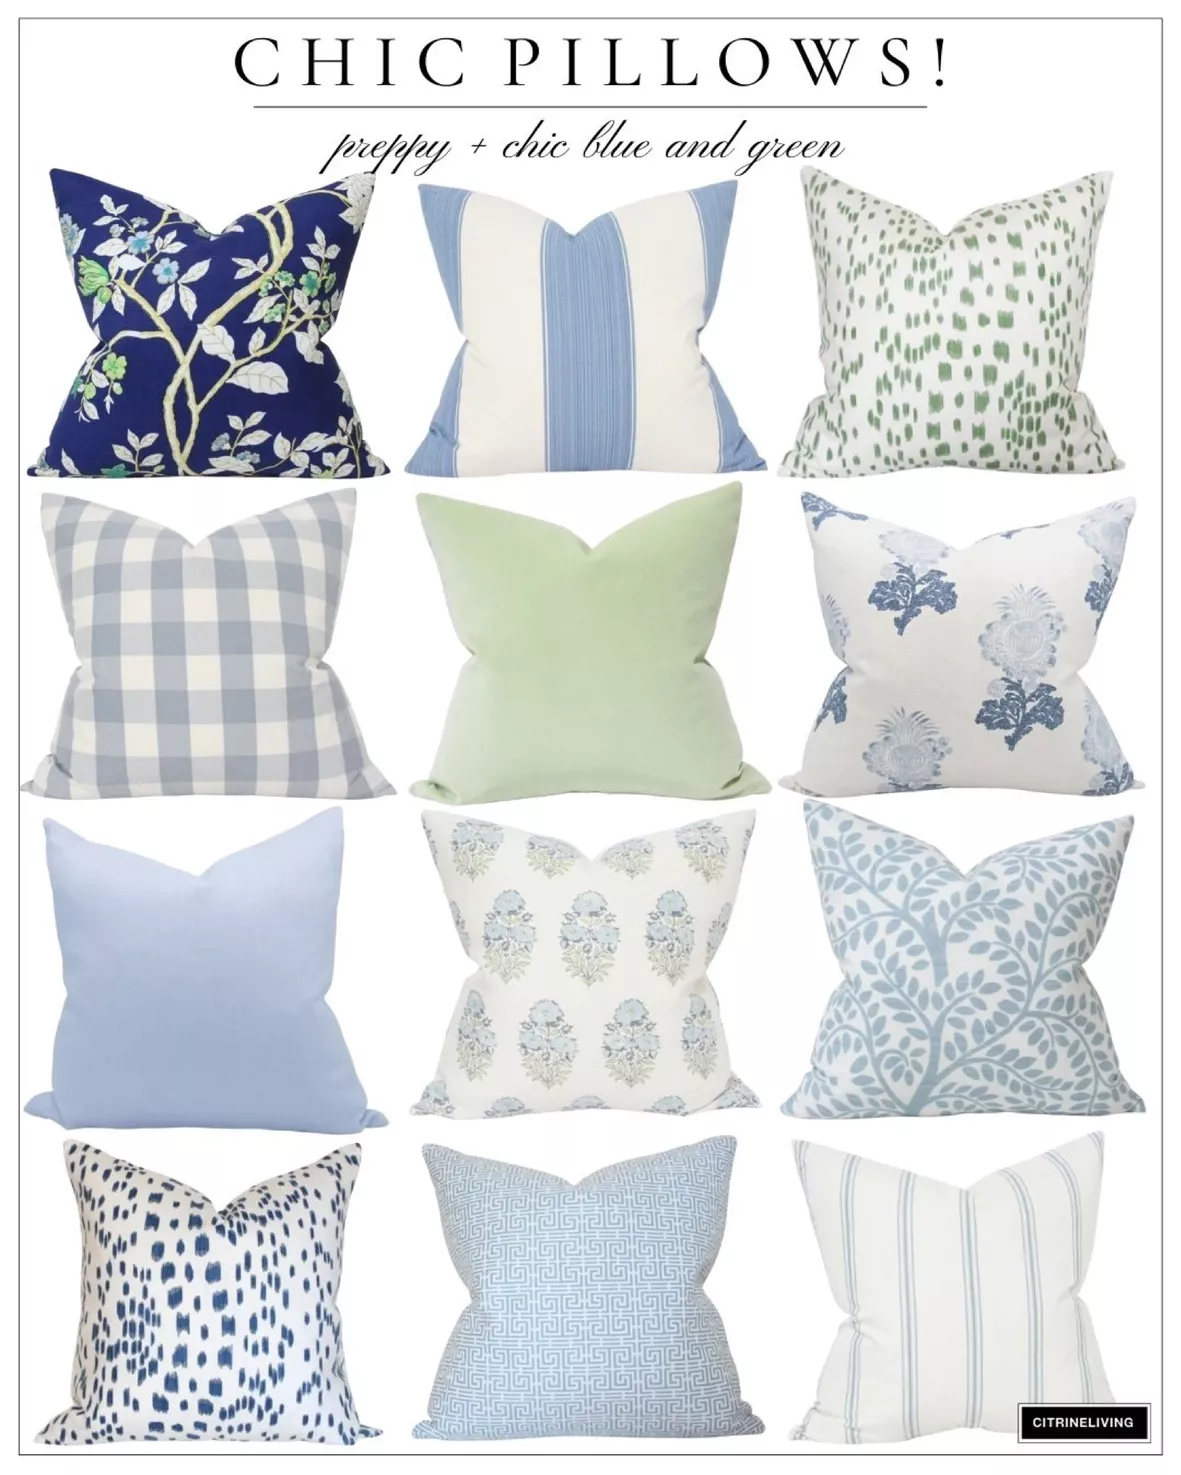 Designer Decorative Pillows For Chic Living Rooms and Bedrooms